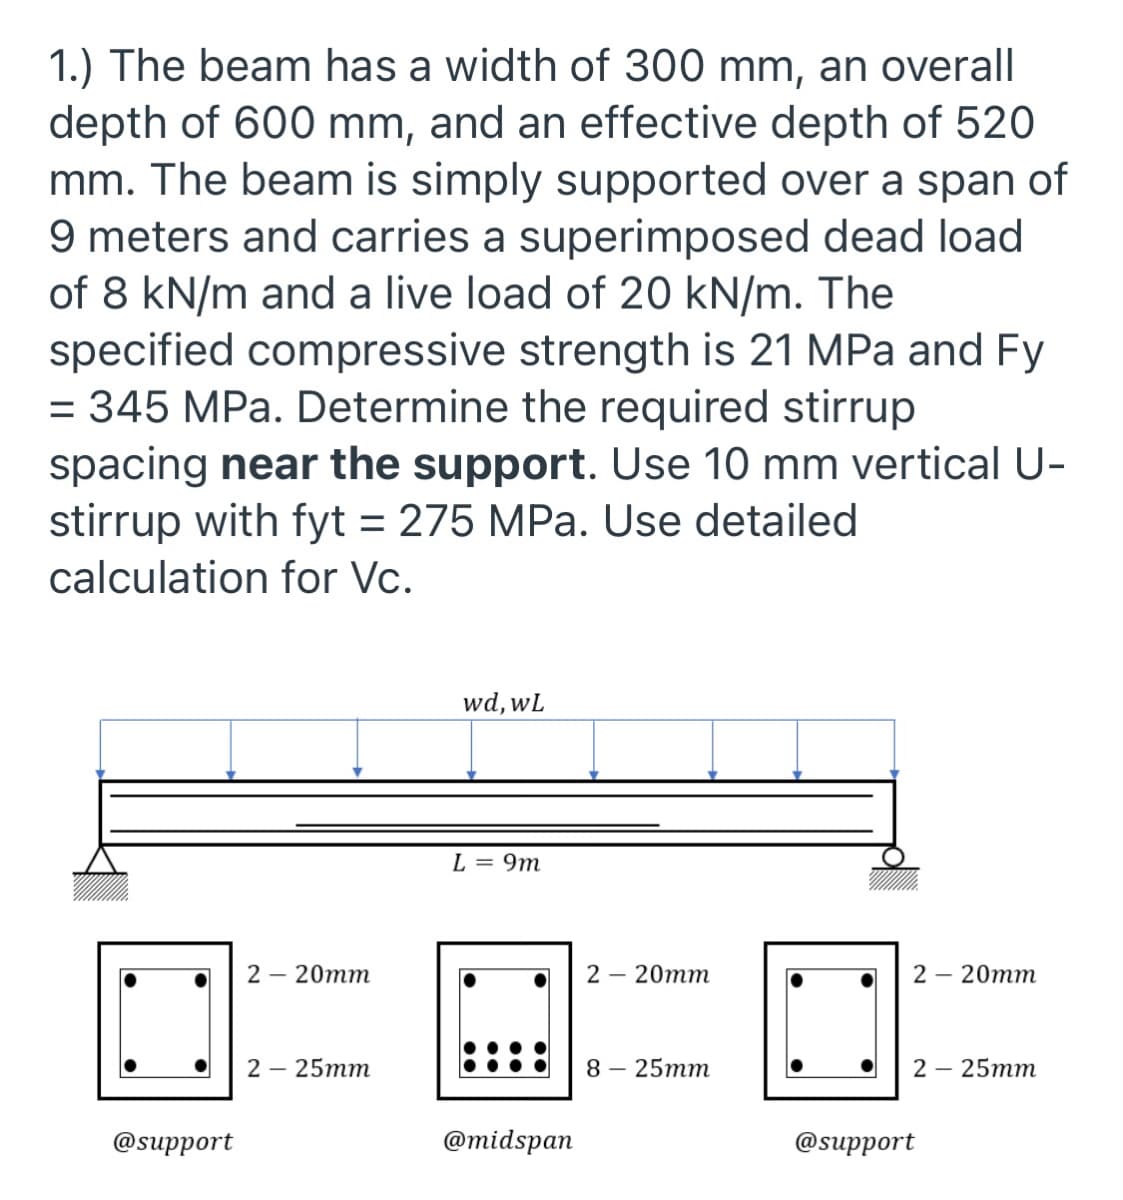 1.) The beam has a width of 300 mm, an overall
depth of 600 mm, and an effective depth of 520
mm. The beam is simply supported over a span of
9 meters and carries a superimposed dead load
of 8 kN/m and a live load of 20 kN/m. The
specified compressive strength is 21 MPa and Fy
= 345 MPa. Determine the required stirrup
spacing near the support. Use 10 mm vertical U-
stirrup with fyt = 275 MPa. Use detailed
calculation for Vc.
wd, wL
L = 9m
2 – 20mm
2 — 20тm
2 – 20mm
2 — 25тm
8— 25тm
2 — 25тm
@support
@тidspan
@support
